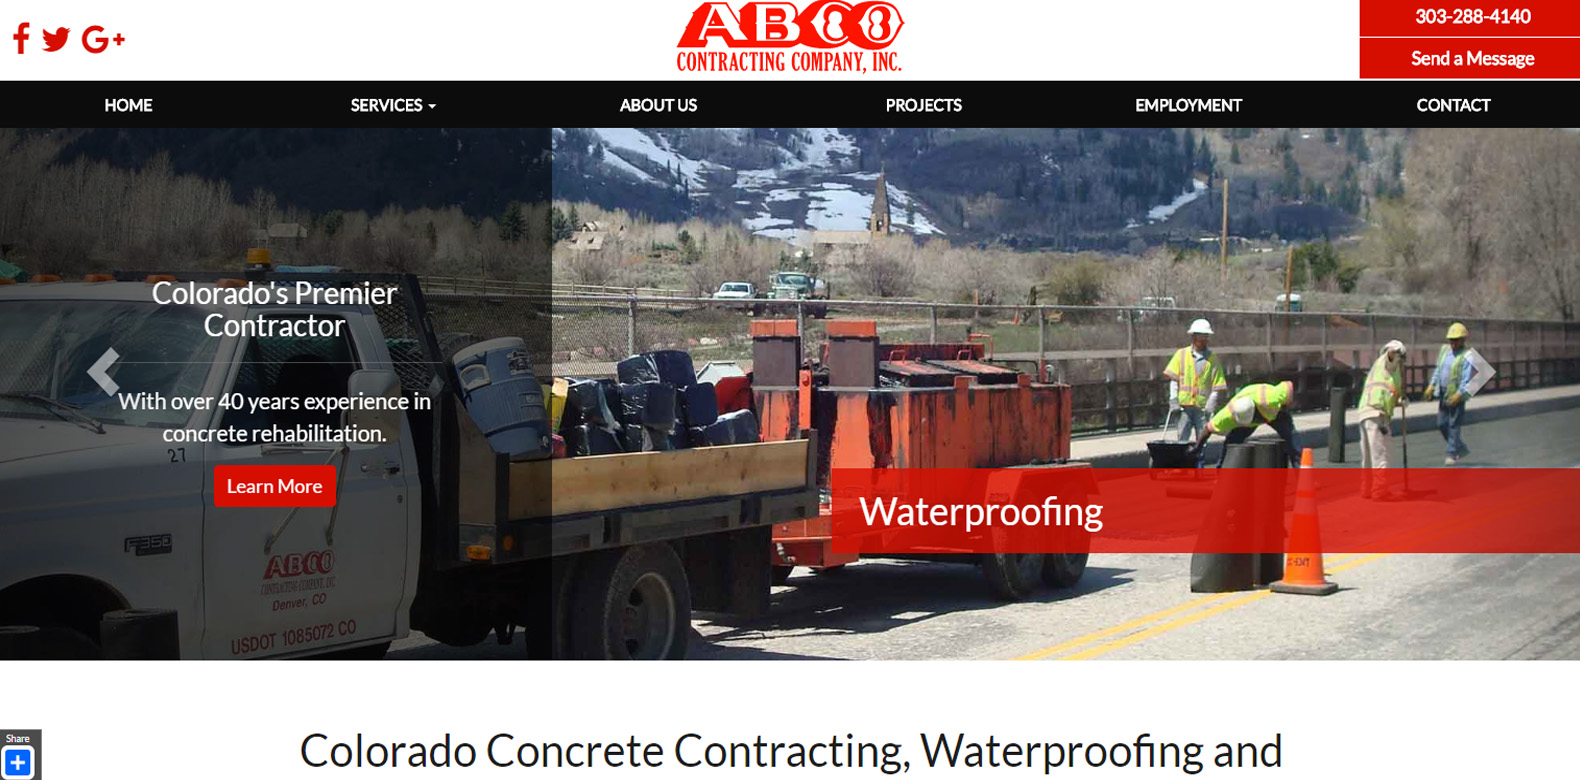 
New Website Launch: ABCO Contracting